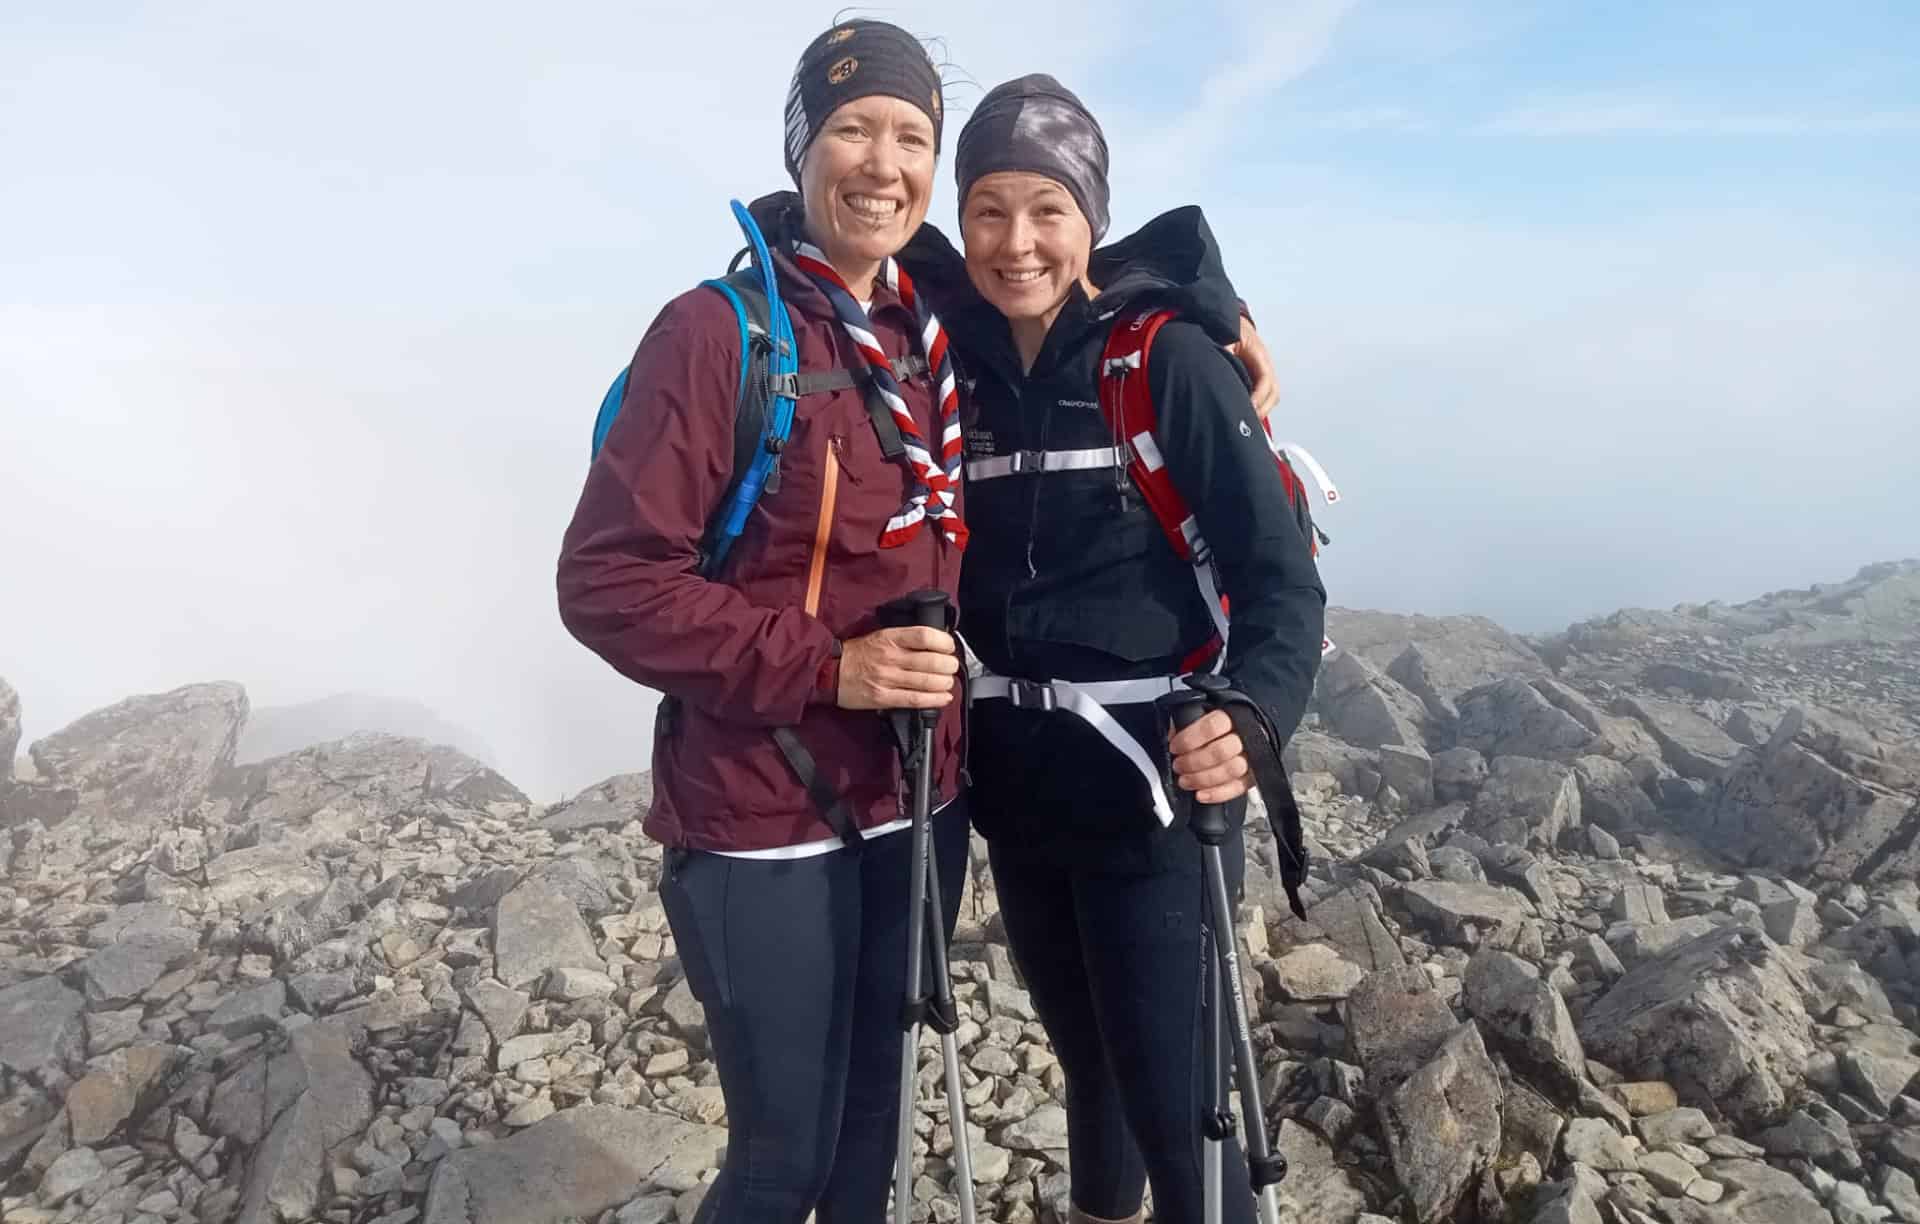 Mary and Sandra at the top of Scafell Pike